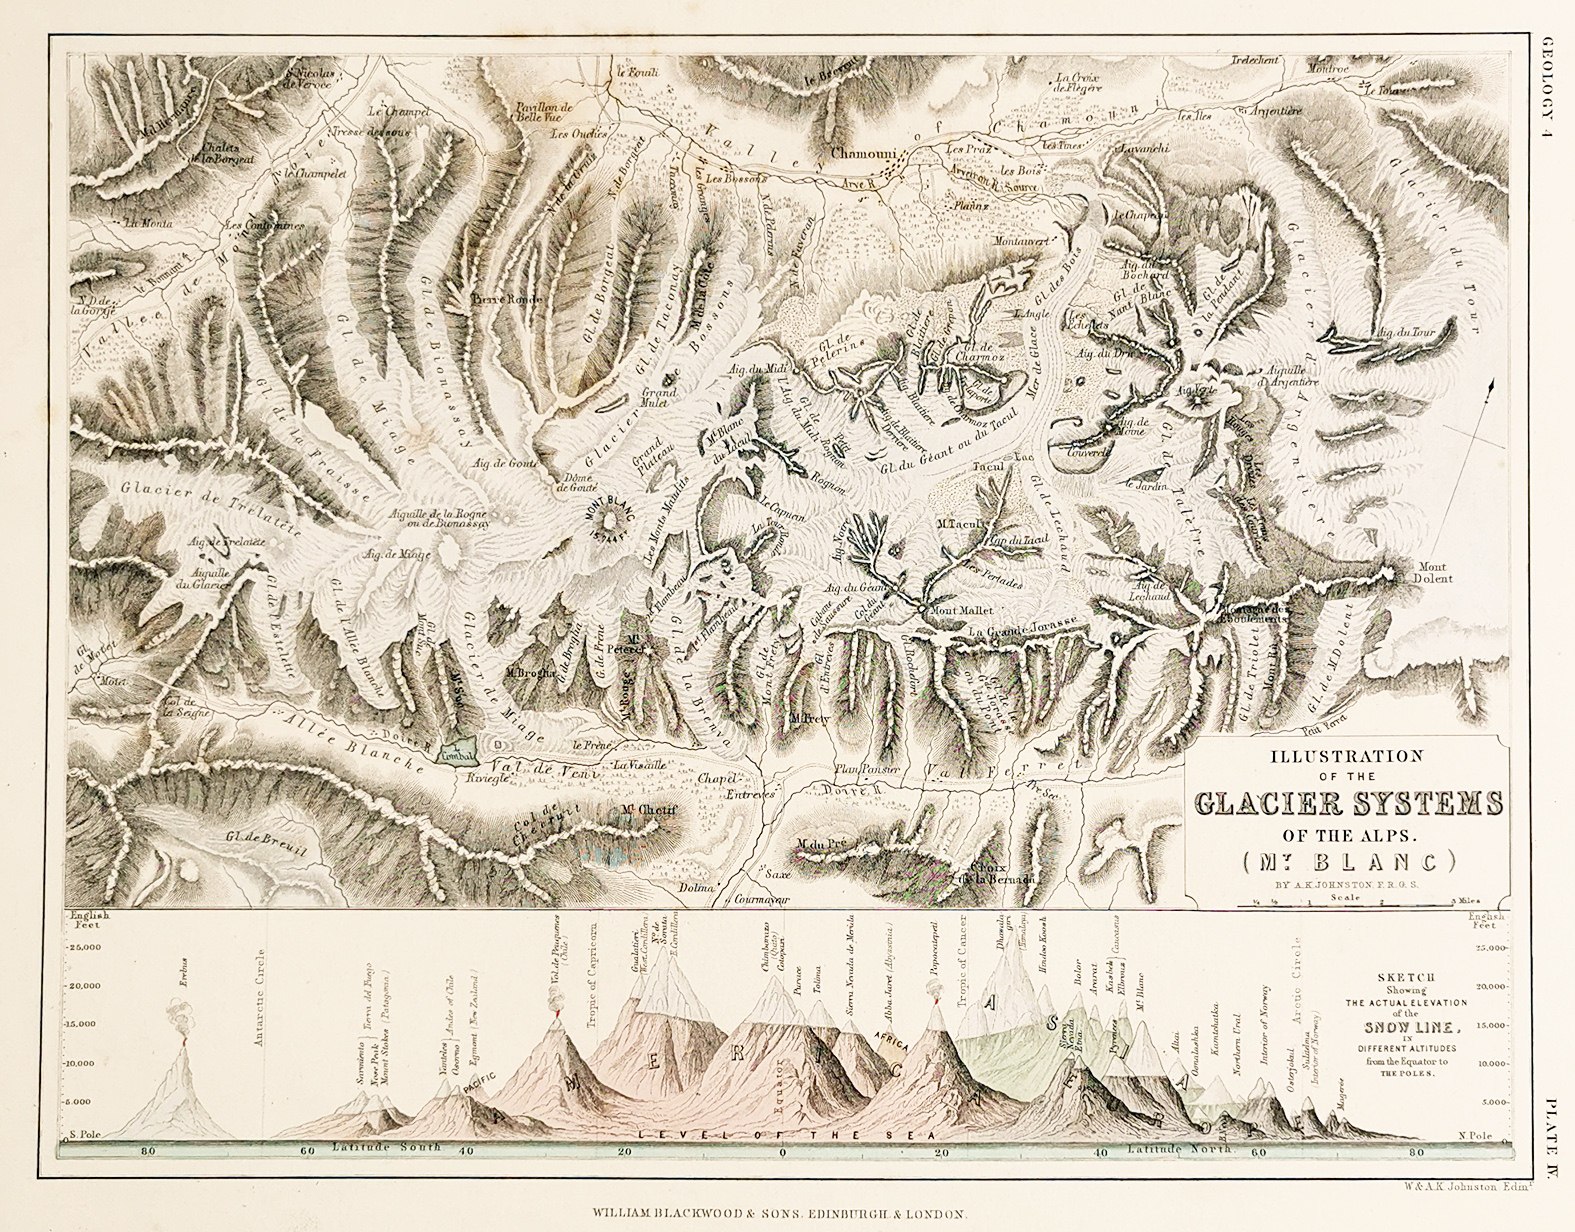 Illustration of the Glacier Systems of the Alps. (Mt Blanc) - Antique Map from 1850